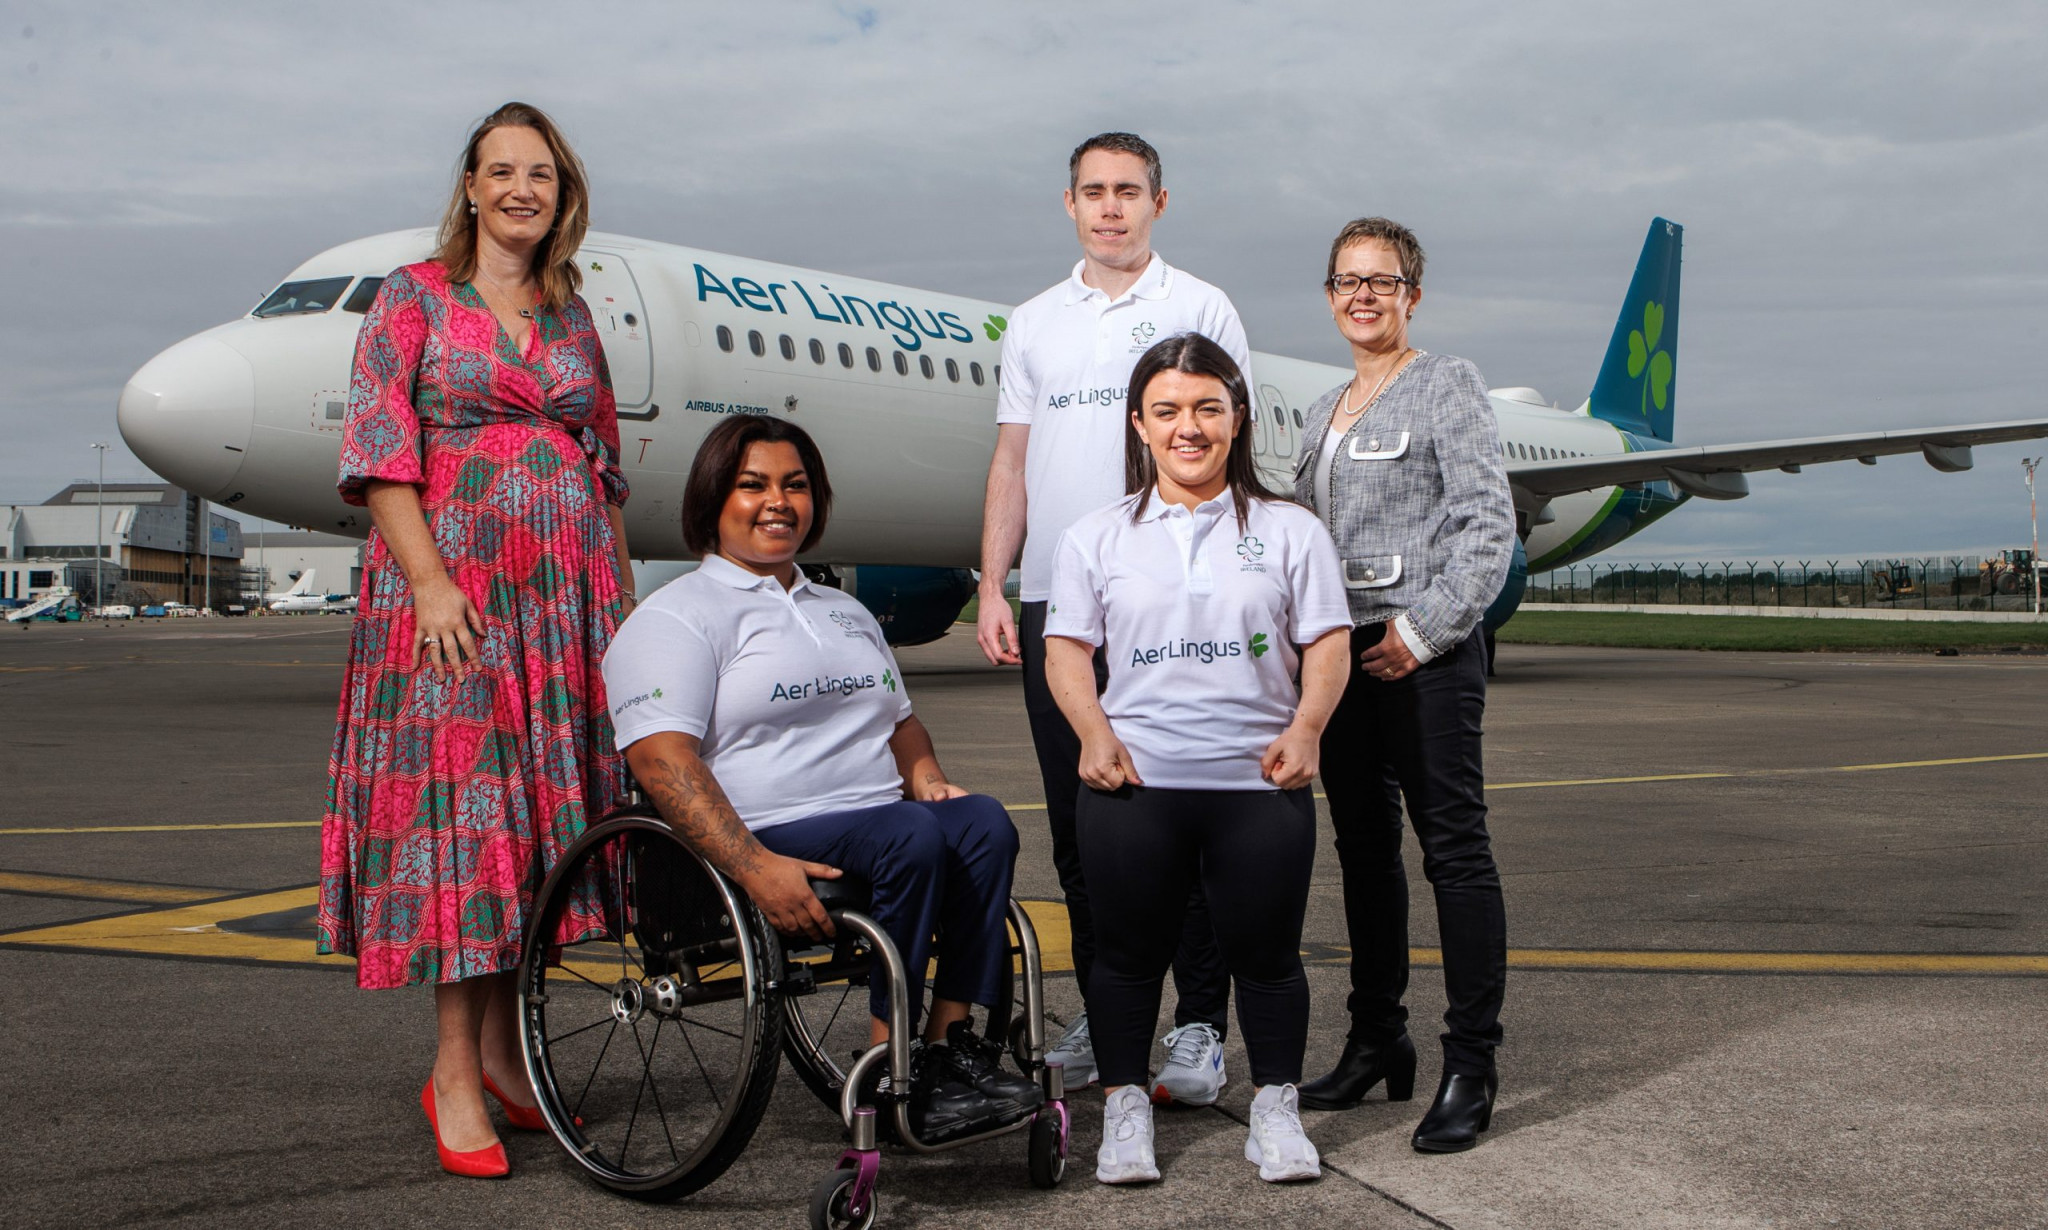 Paralympics Ireland and Aer Lingus have partnered before Paris 2024 ©Paralympics Ireland